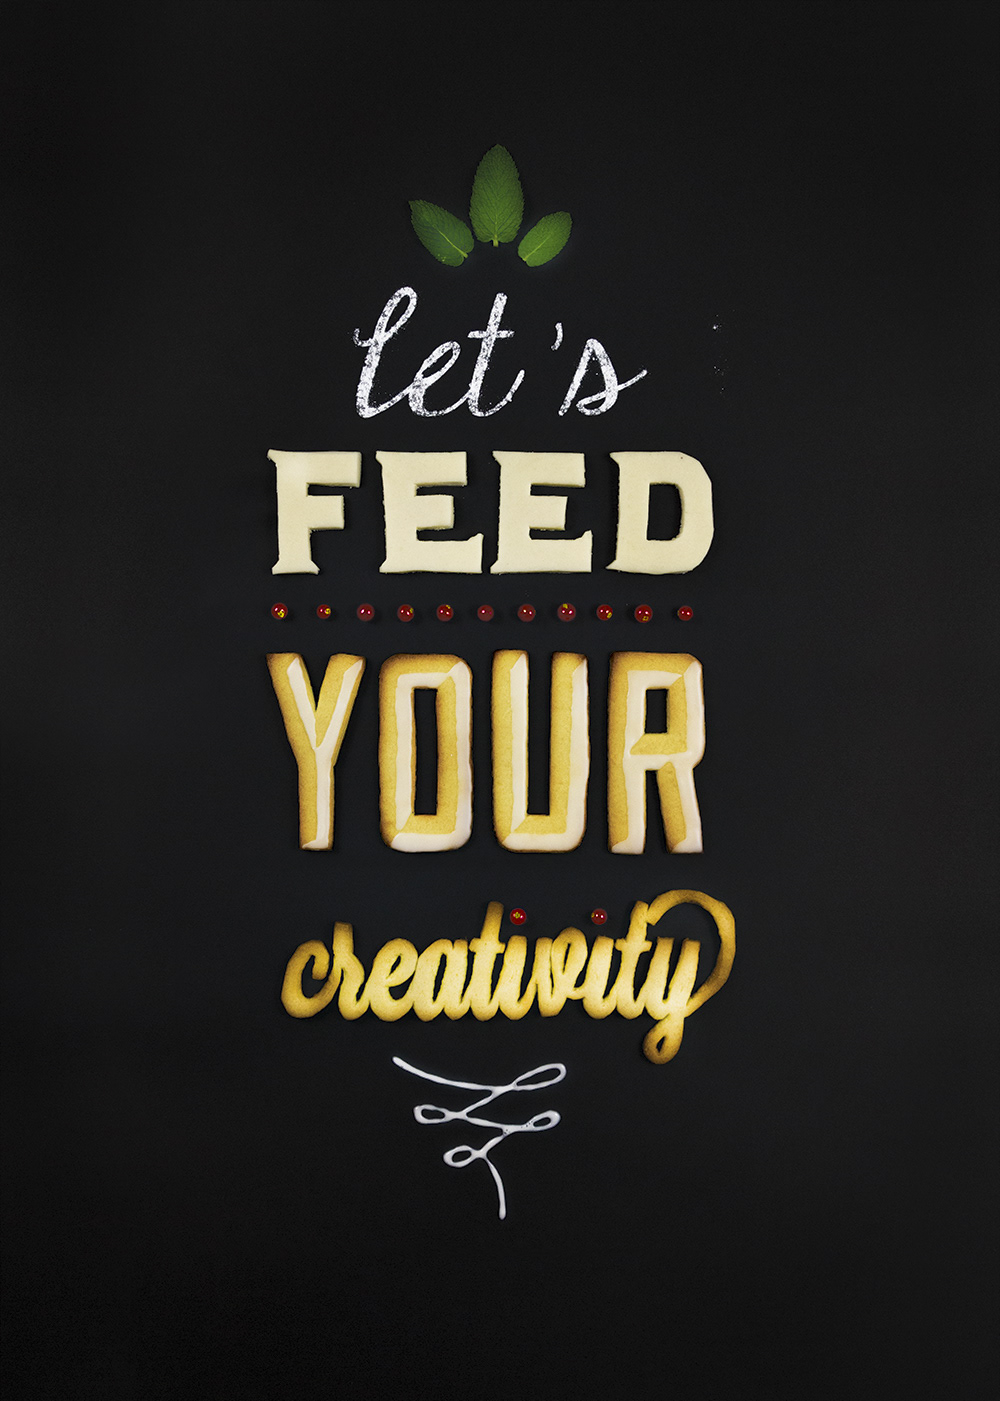 Creativity Food  feed font types TYPOS sweet sugar flour wish new year ingredients illustrated typography typeface design inspire